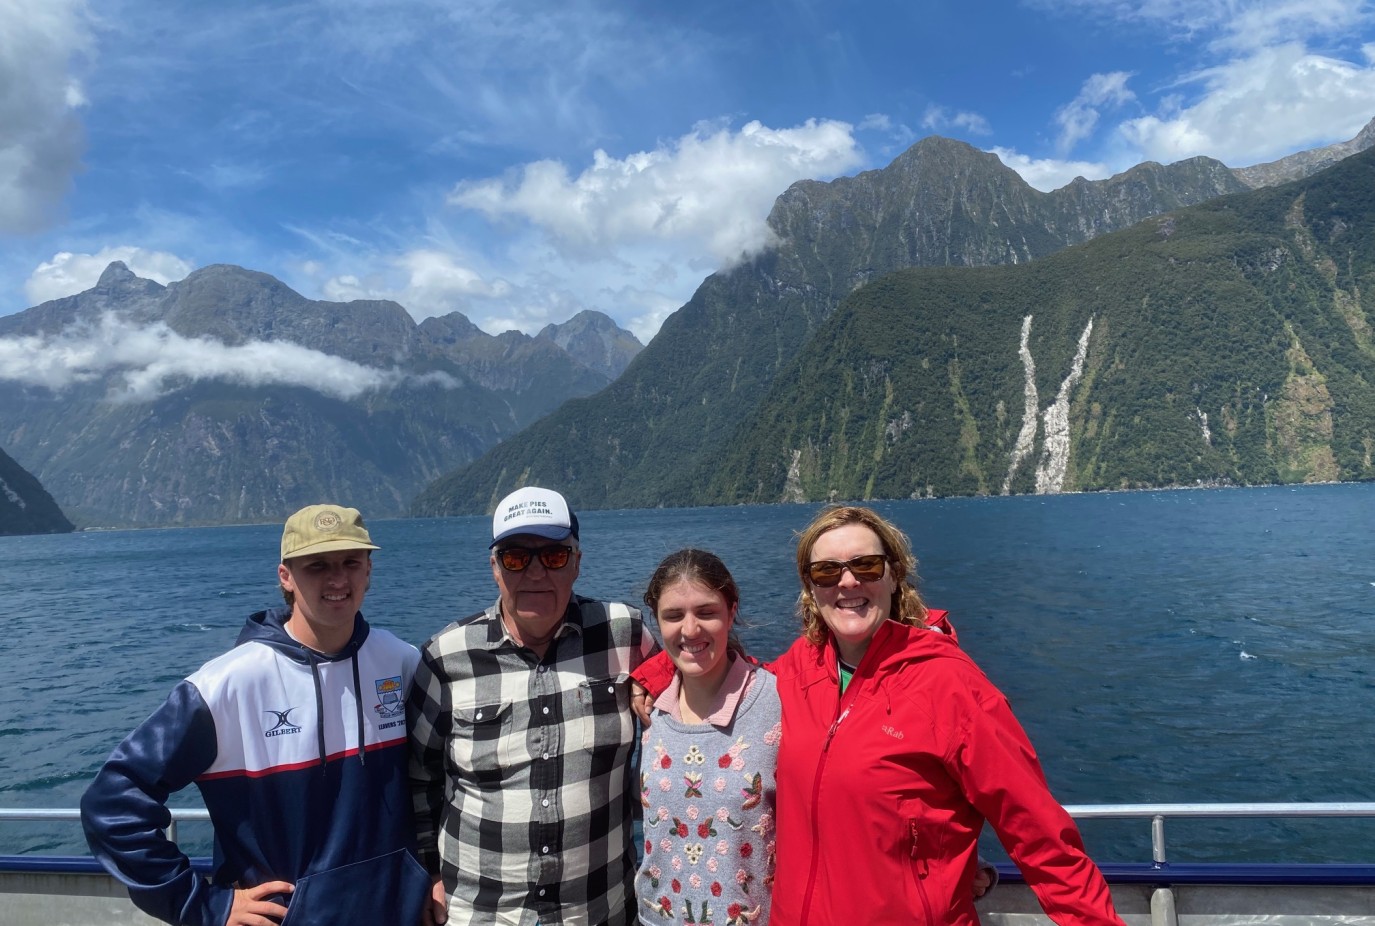 JakJ JohnnyJ Lana and Yvonne at Milford Sound in 2022